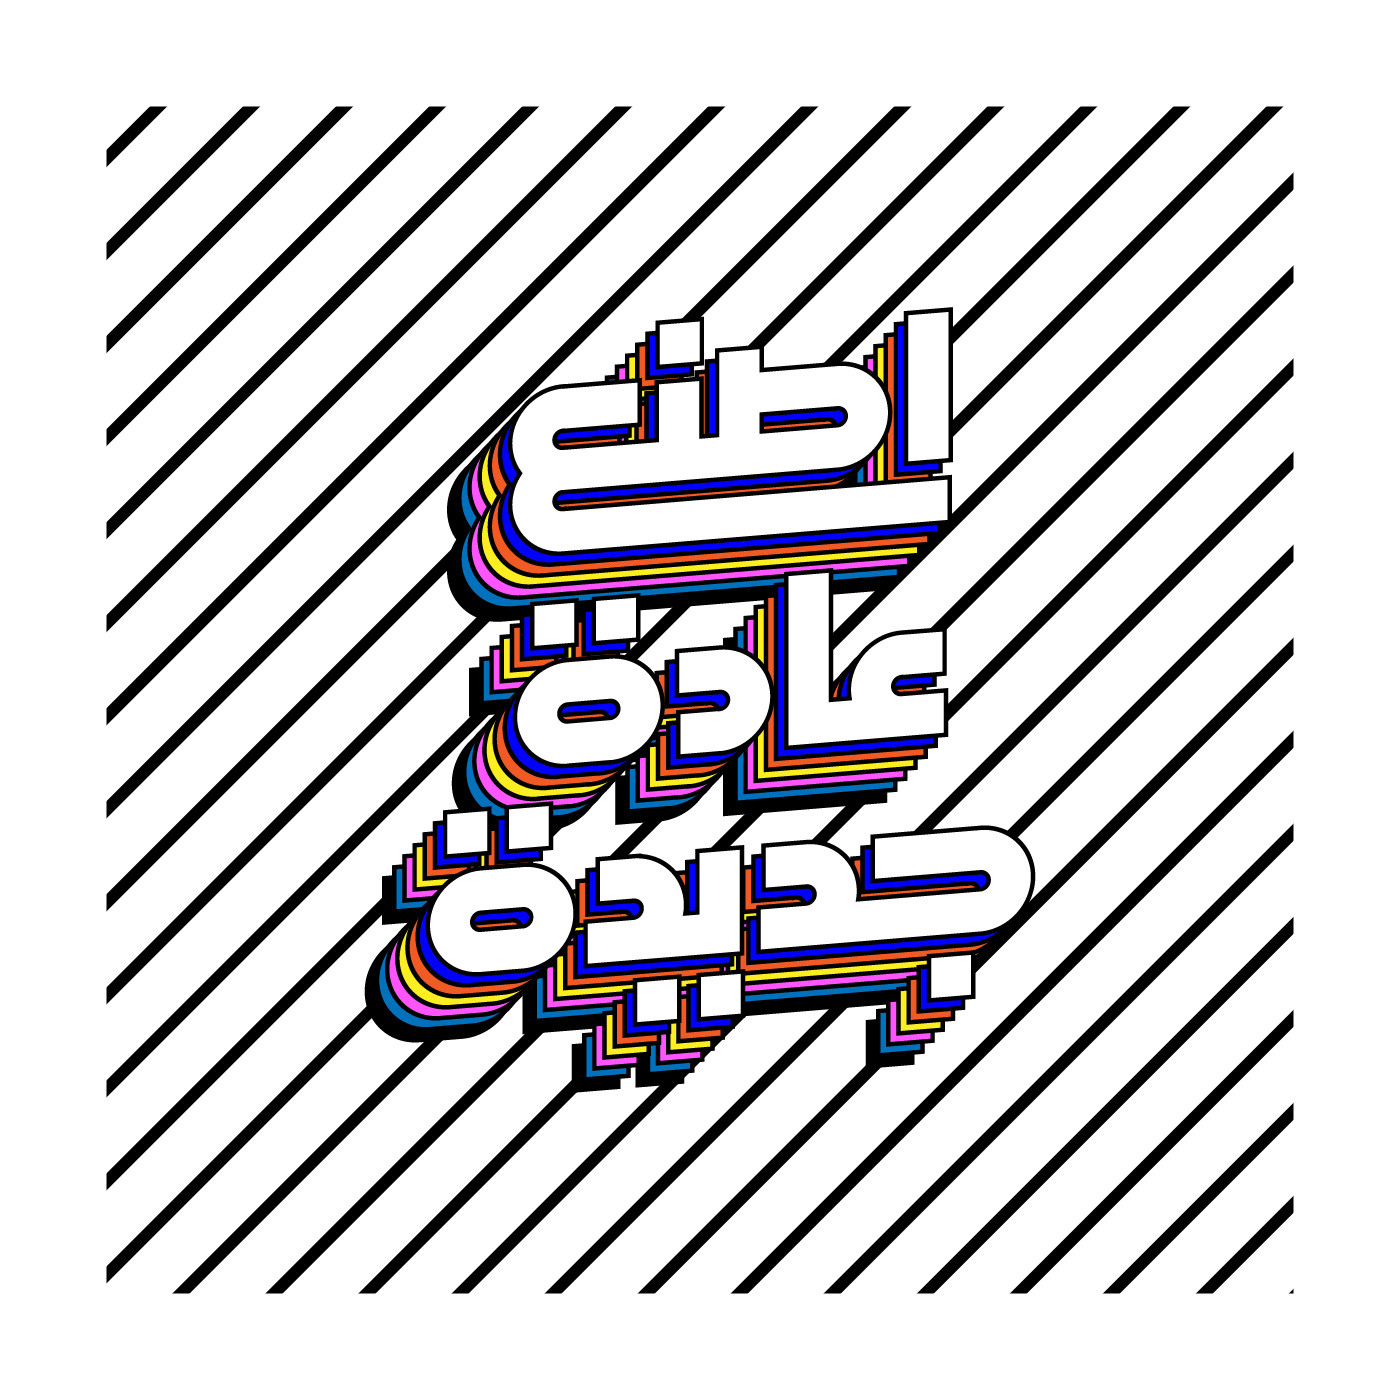 arabic Calligraphy   design ILLUSTRATION  lettering logo posters Quotes type design typography  